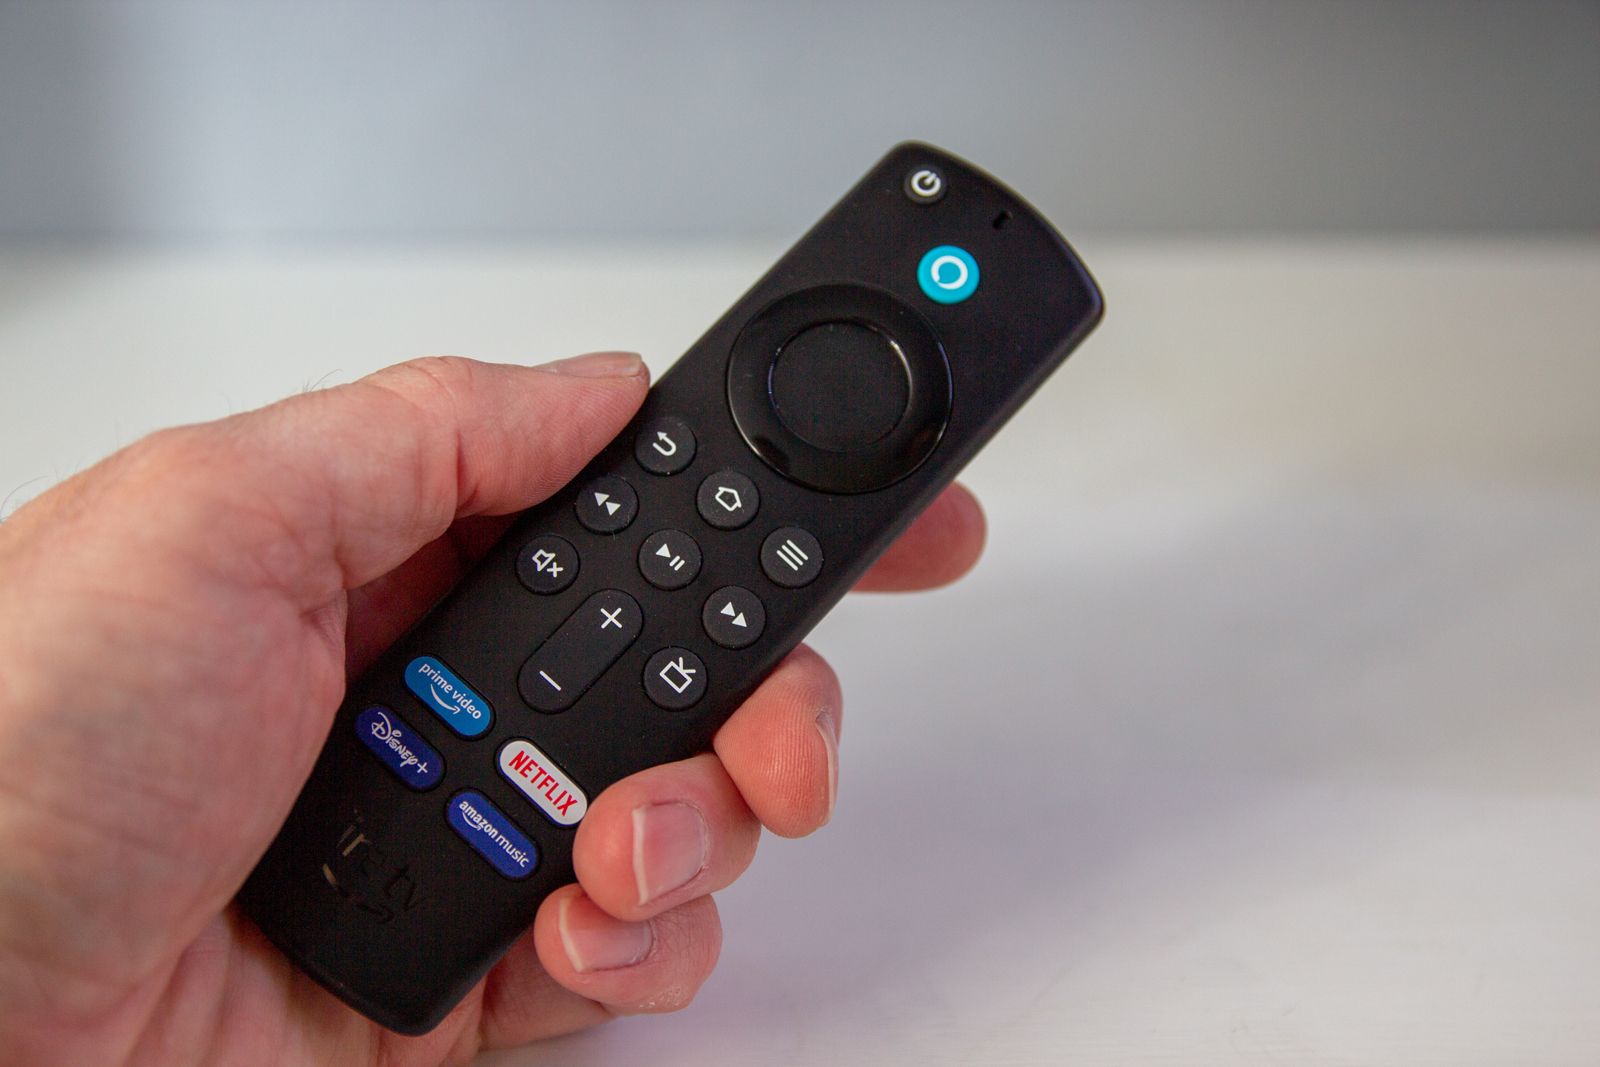 How to reset Fire TV remote